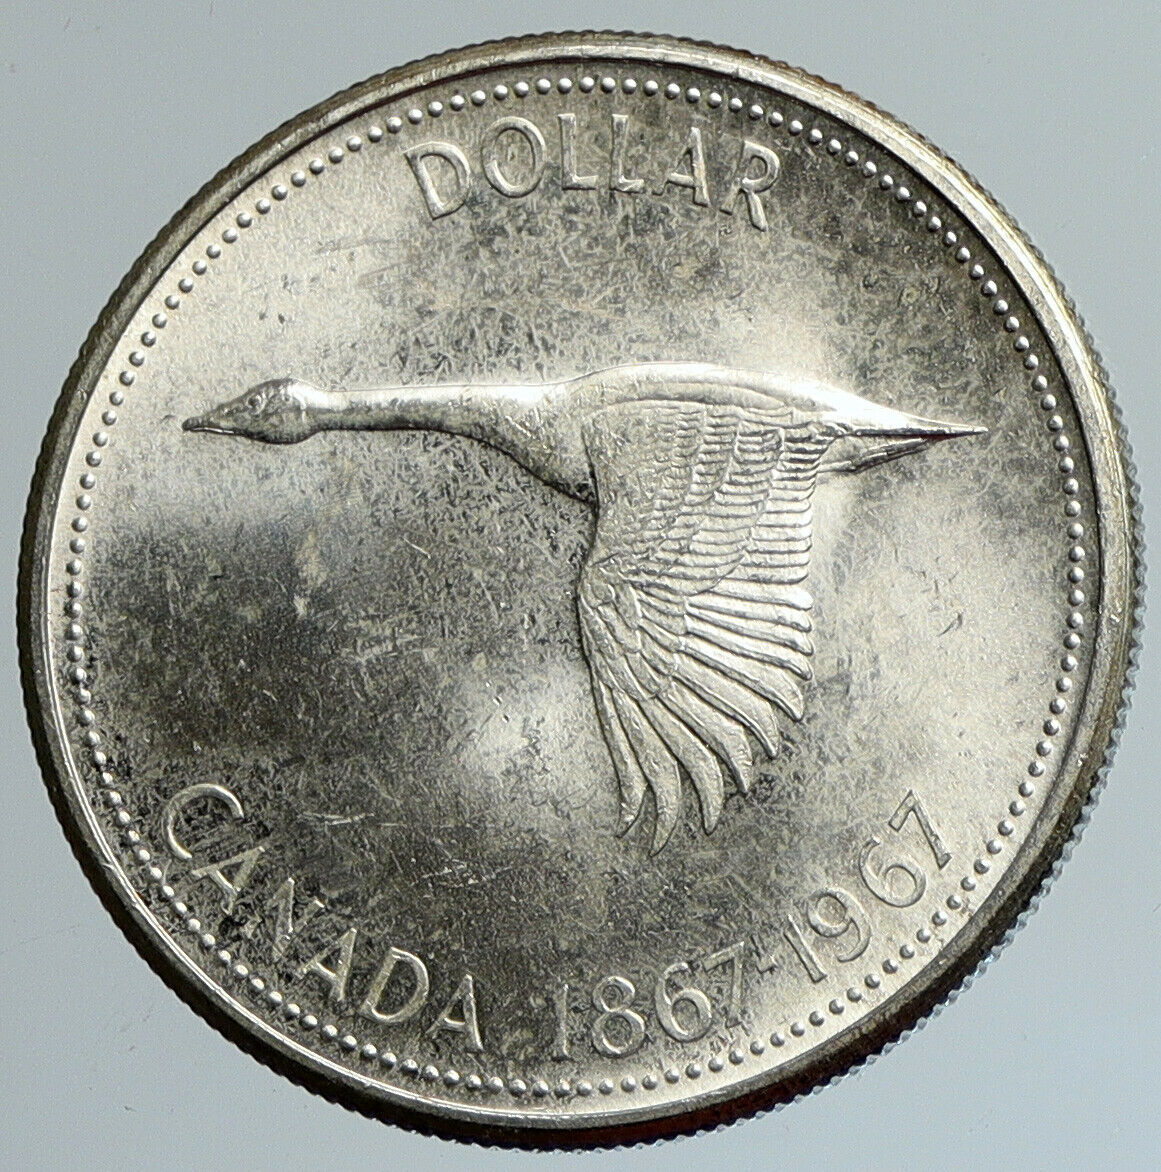 1967 CANADA CANADIAN Confederation Founding Goose OLD Silver Dollar Coin i111667